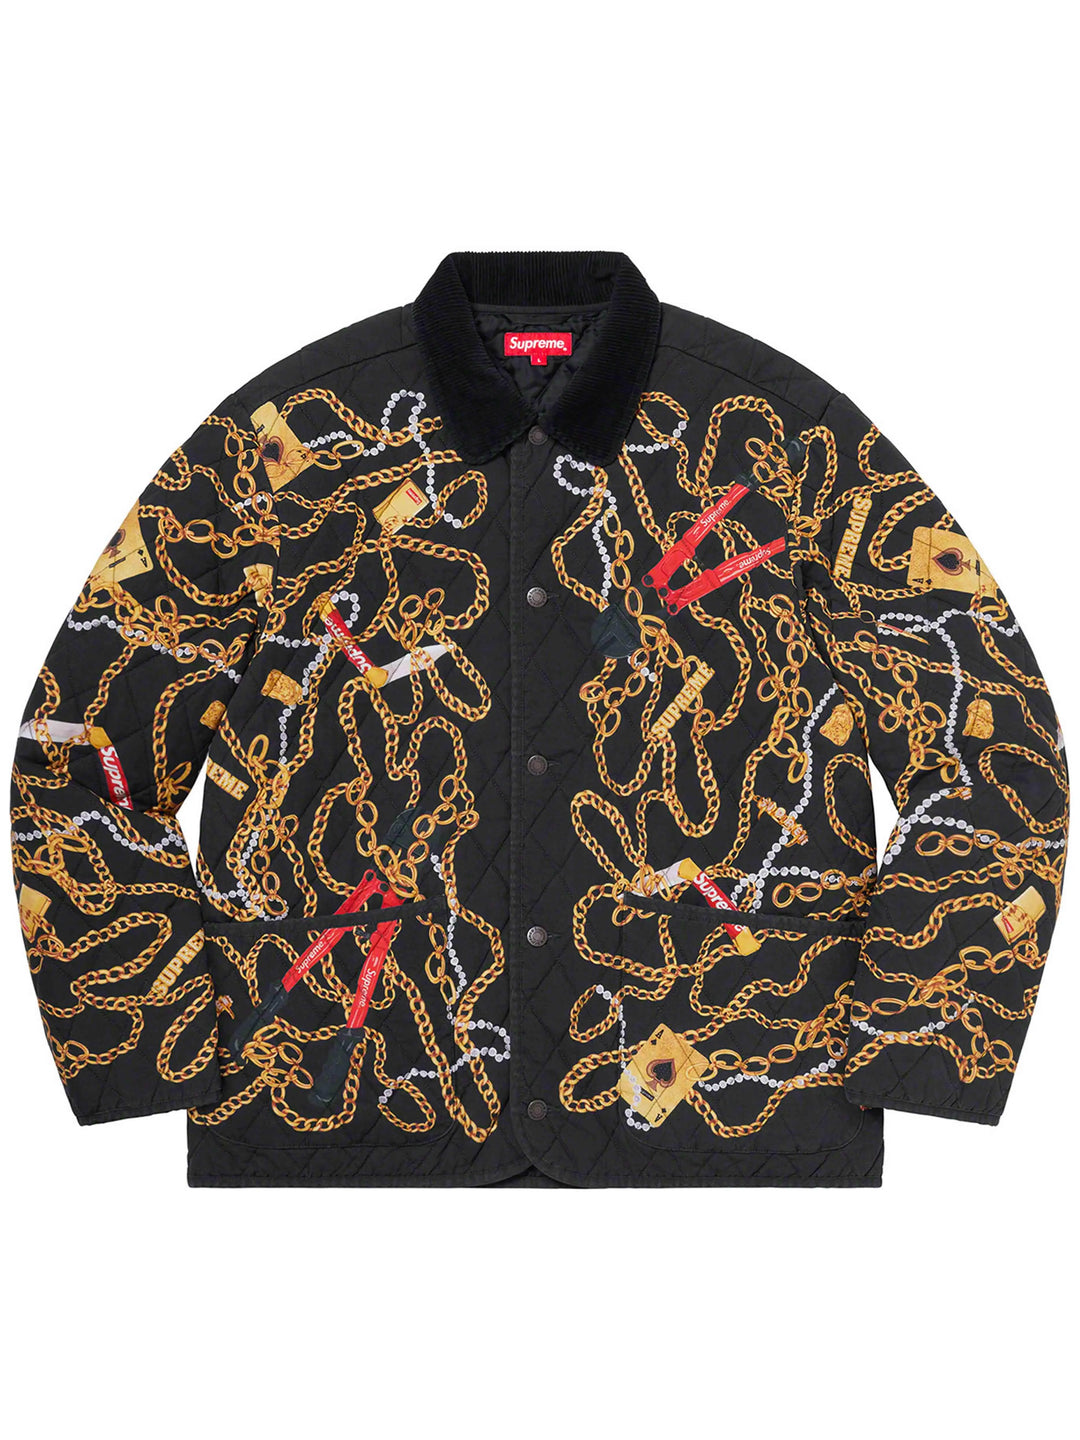 Supreme Chains Quilted Jacket Black [FW20] Prior